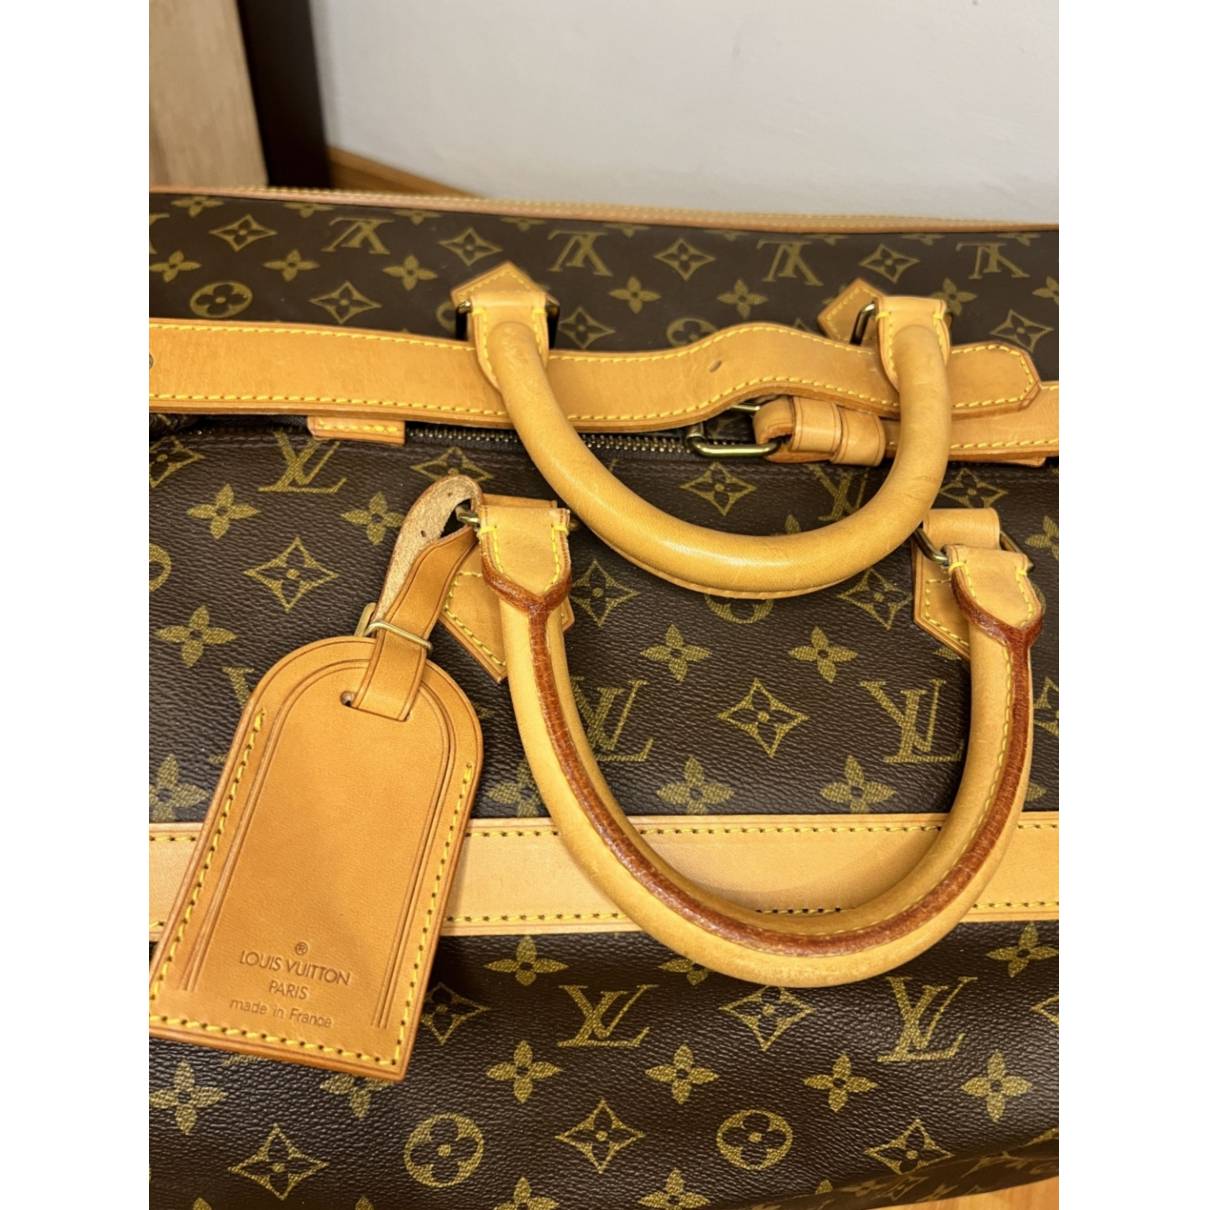 Rare Louis Vuitton The French Company Carry On Tote Bag Monogram